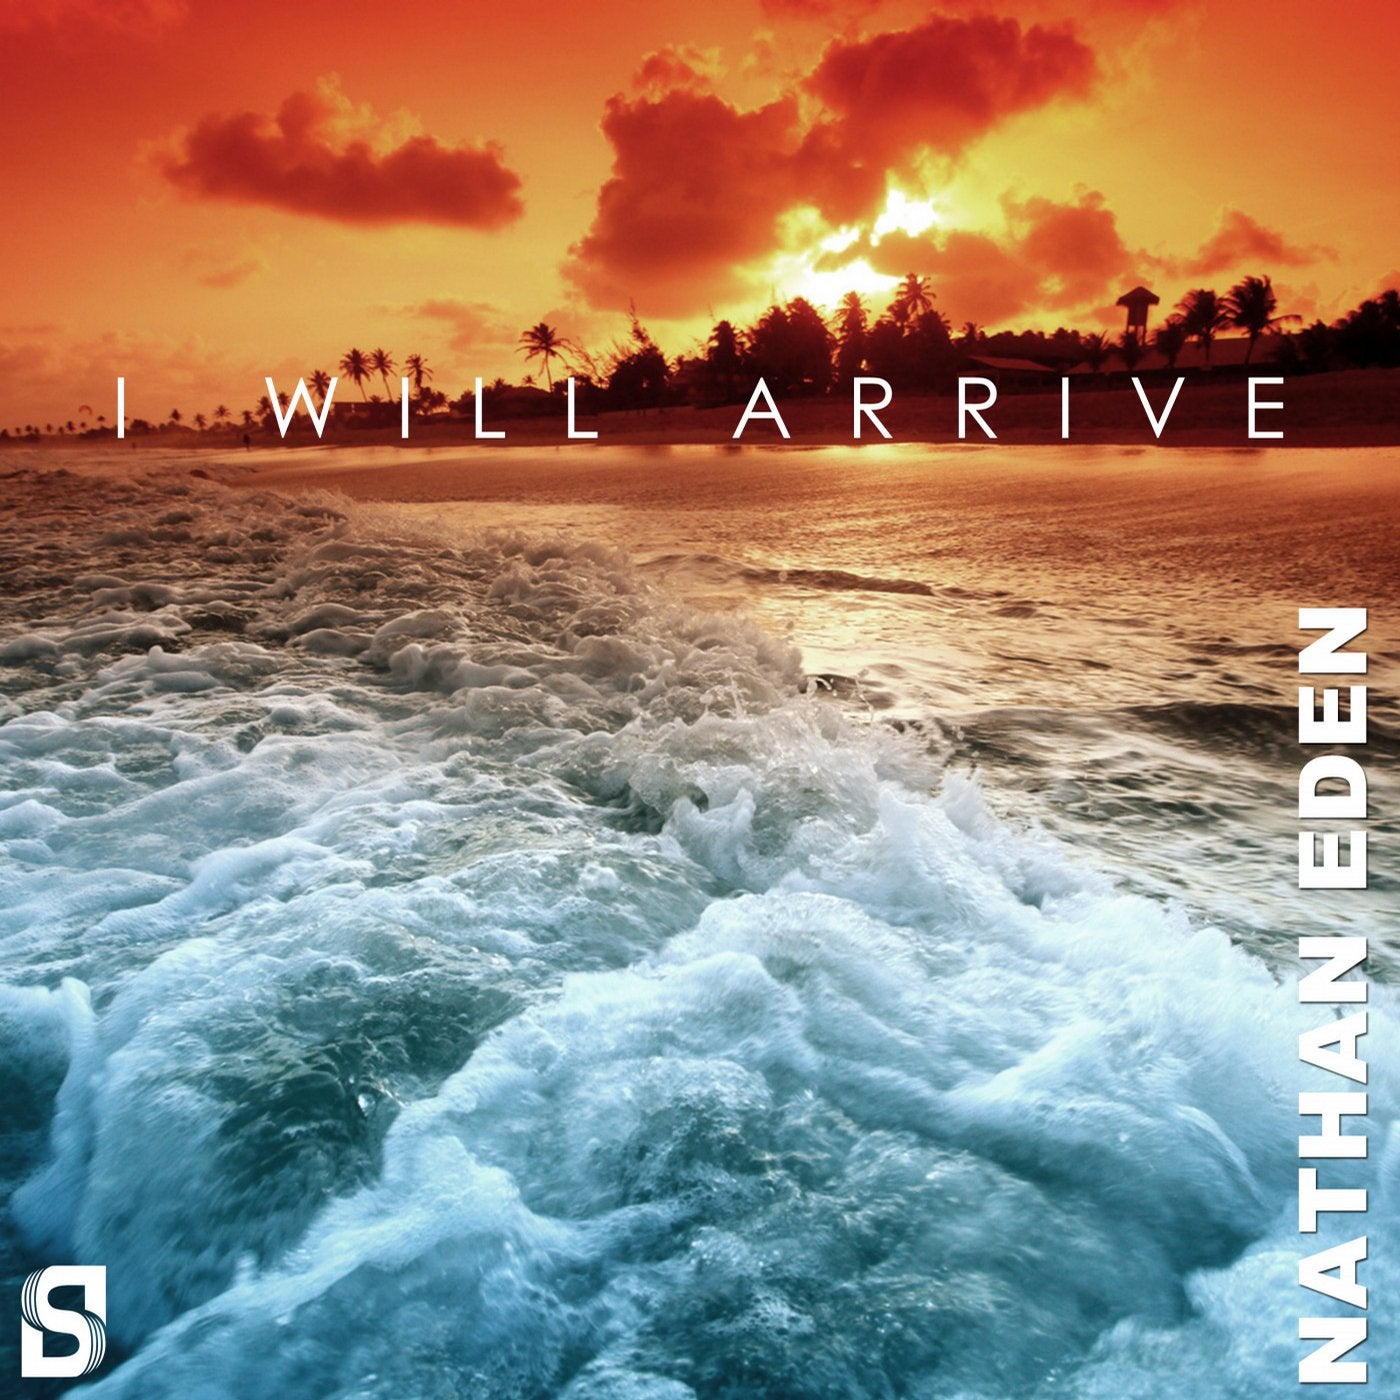 I Will Arrive (Original Mix) by NATHAN EDEN on Beatport